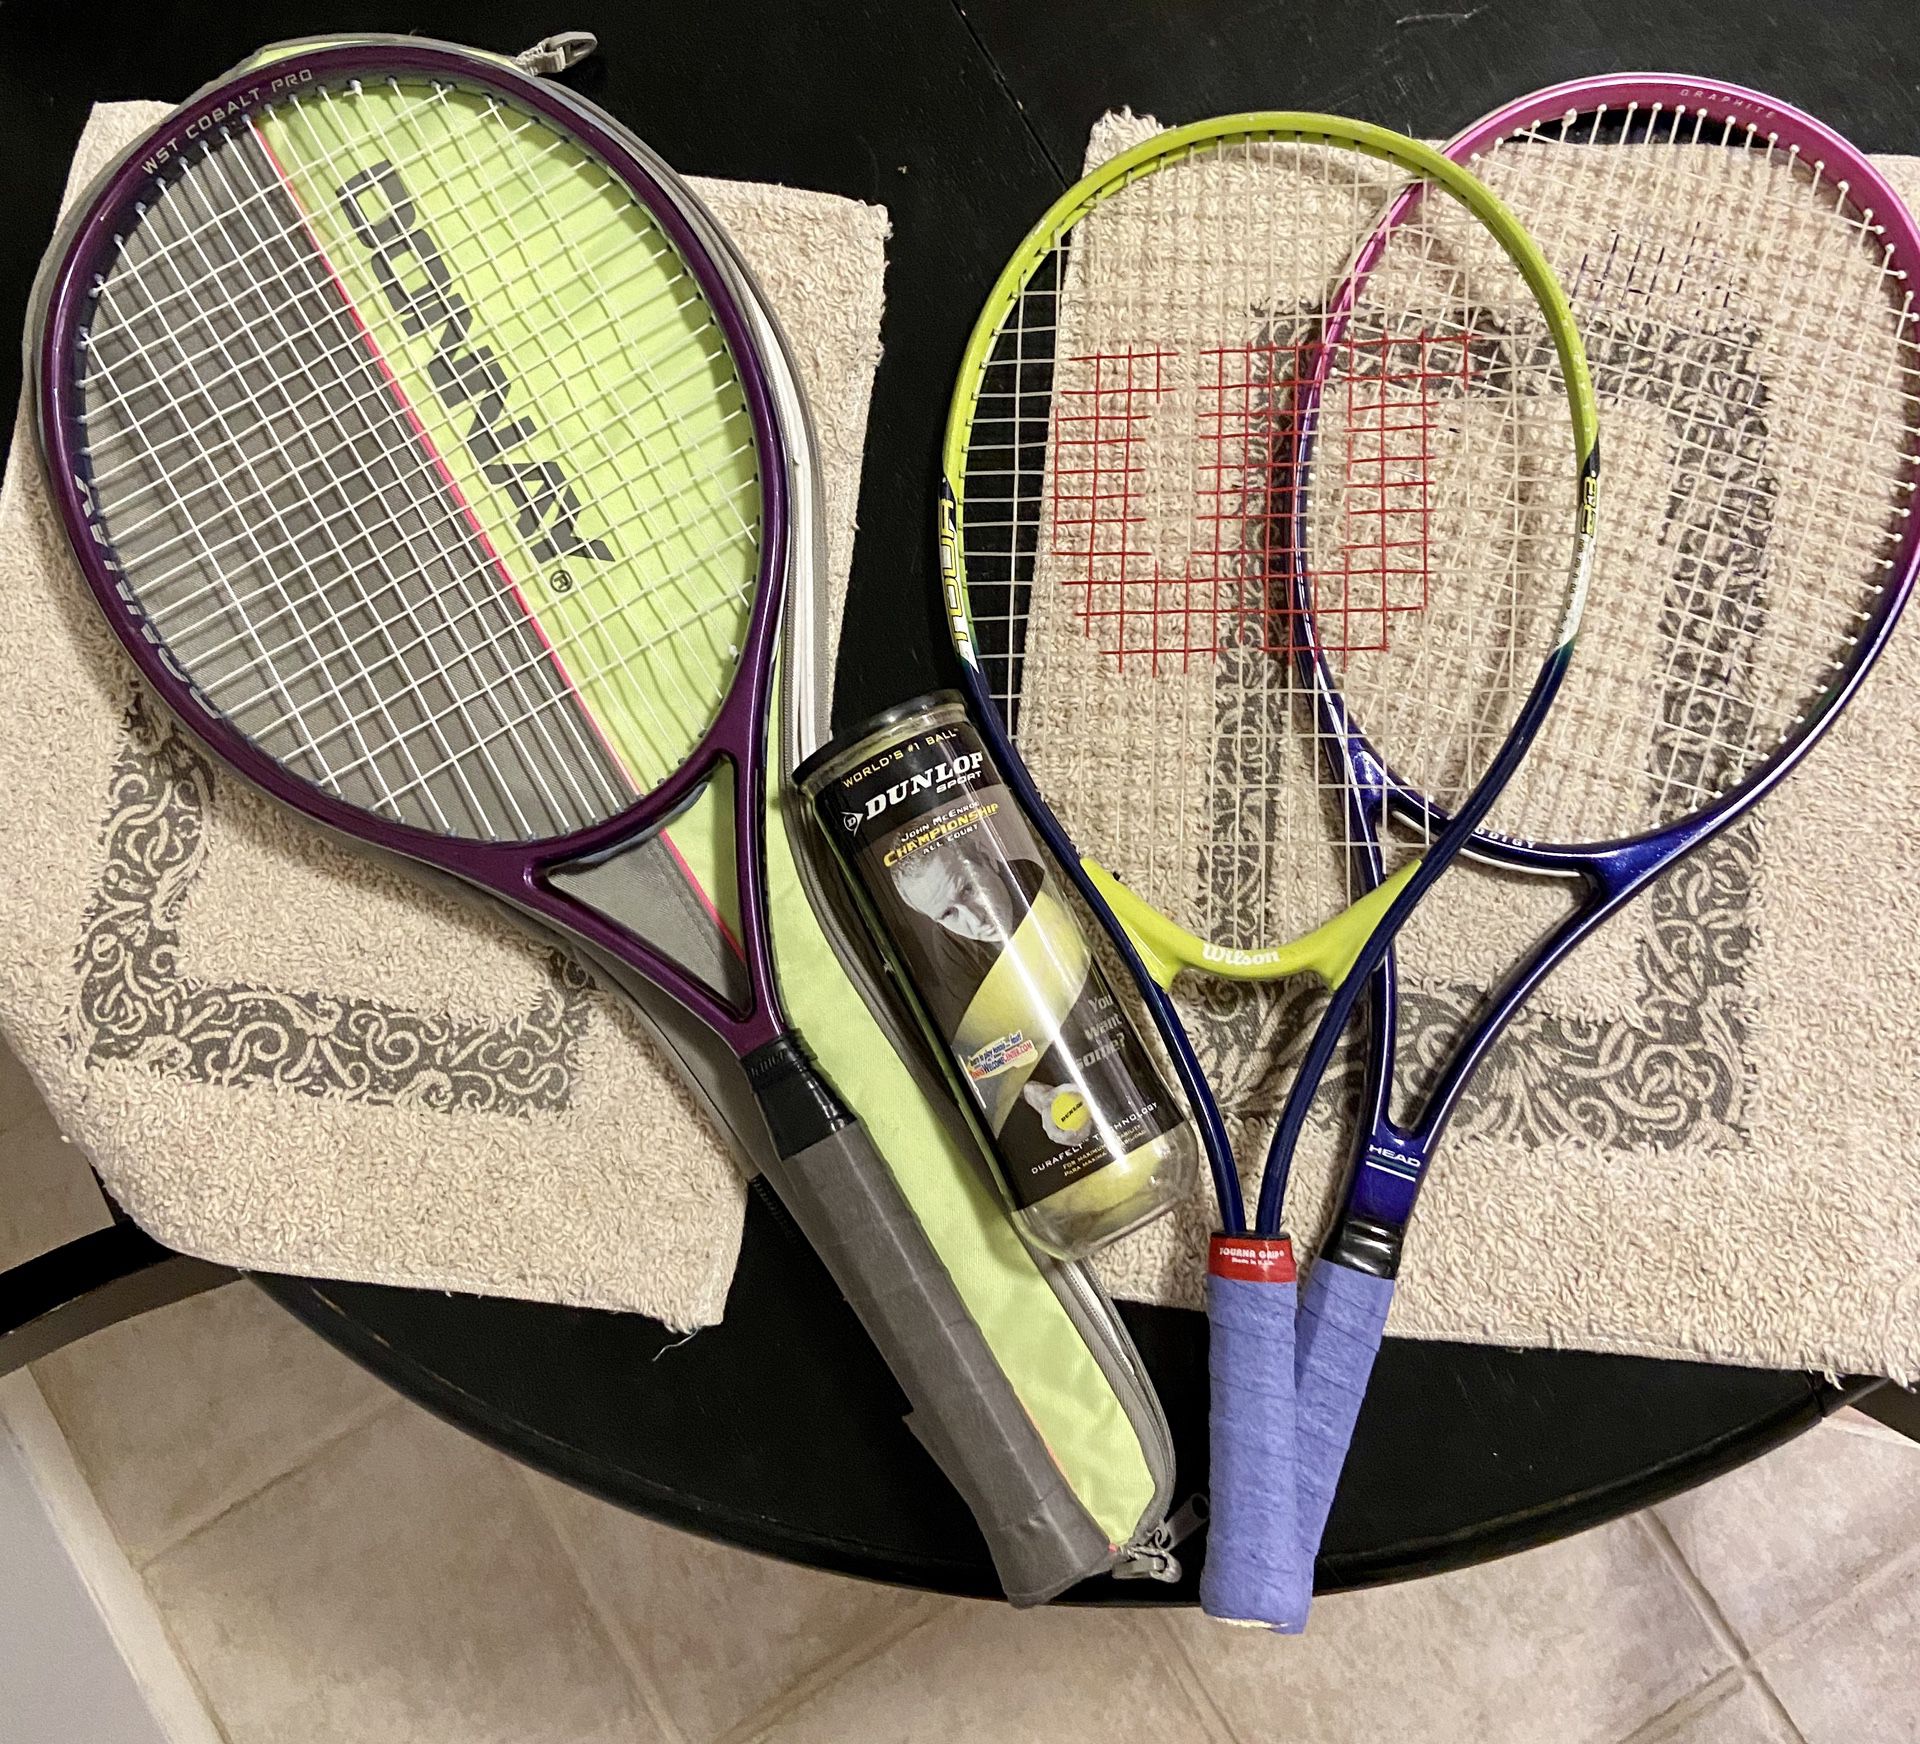 3 Tennis Rackets (1 adult, 2 smaller size rackets & 1 unopened can of Tennis balls)